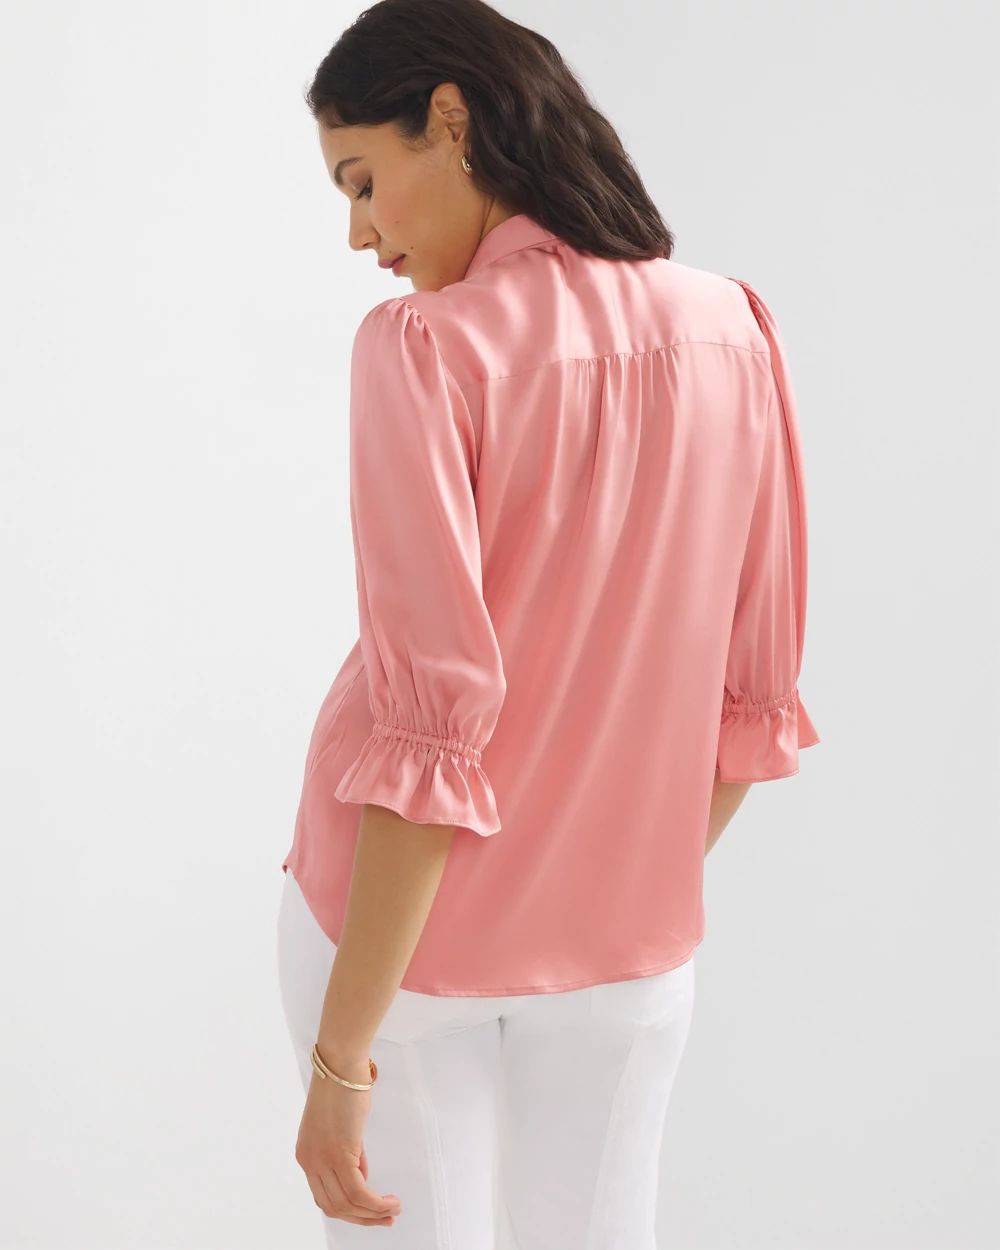 Elbow Sleeve Satin Button Shirt click to view larger image.